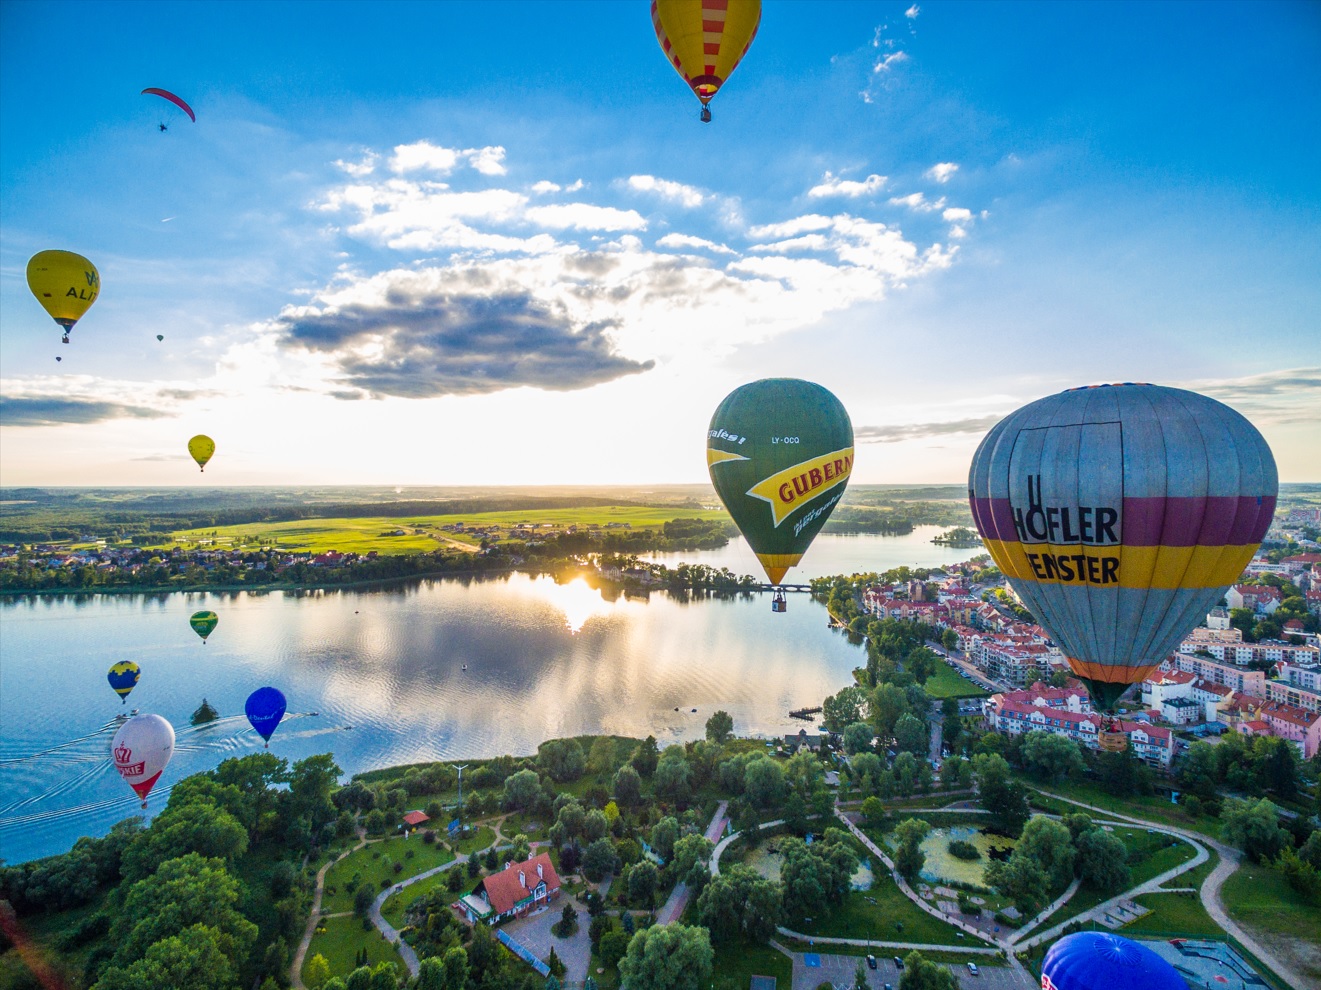 XV Masurian Balloon Competition for the Cup of the President of the City of Ełk